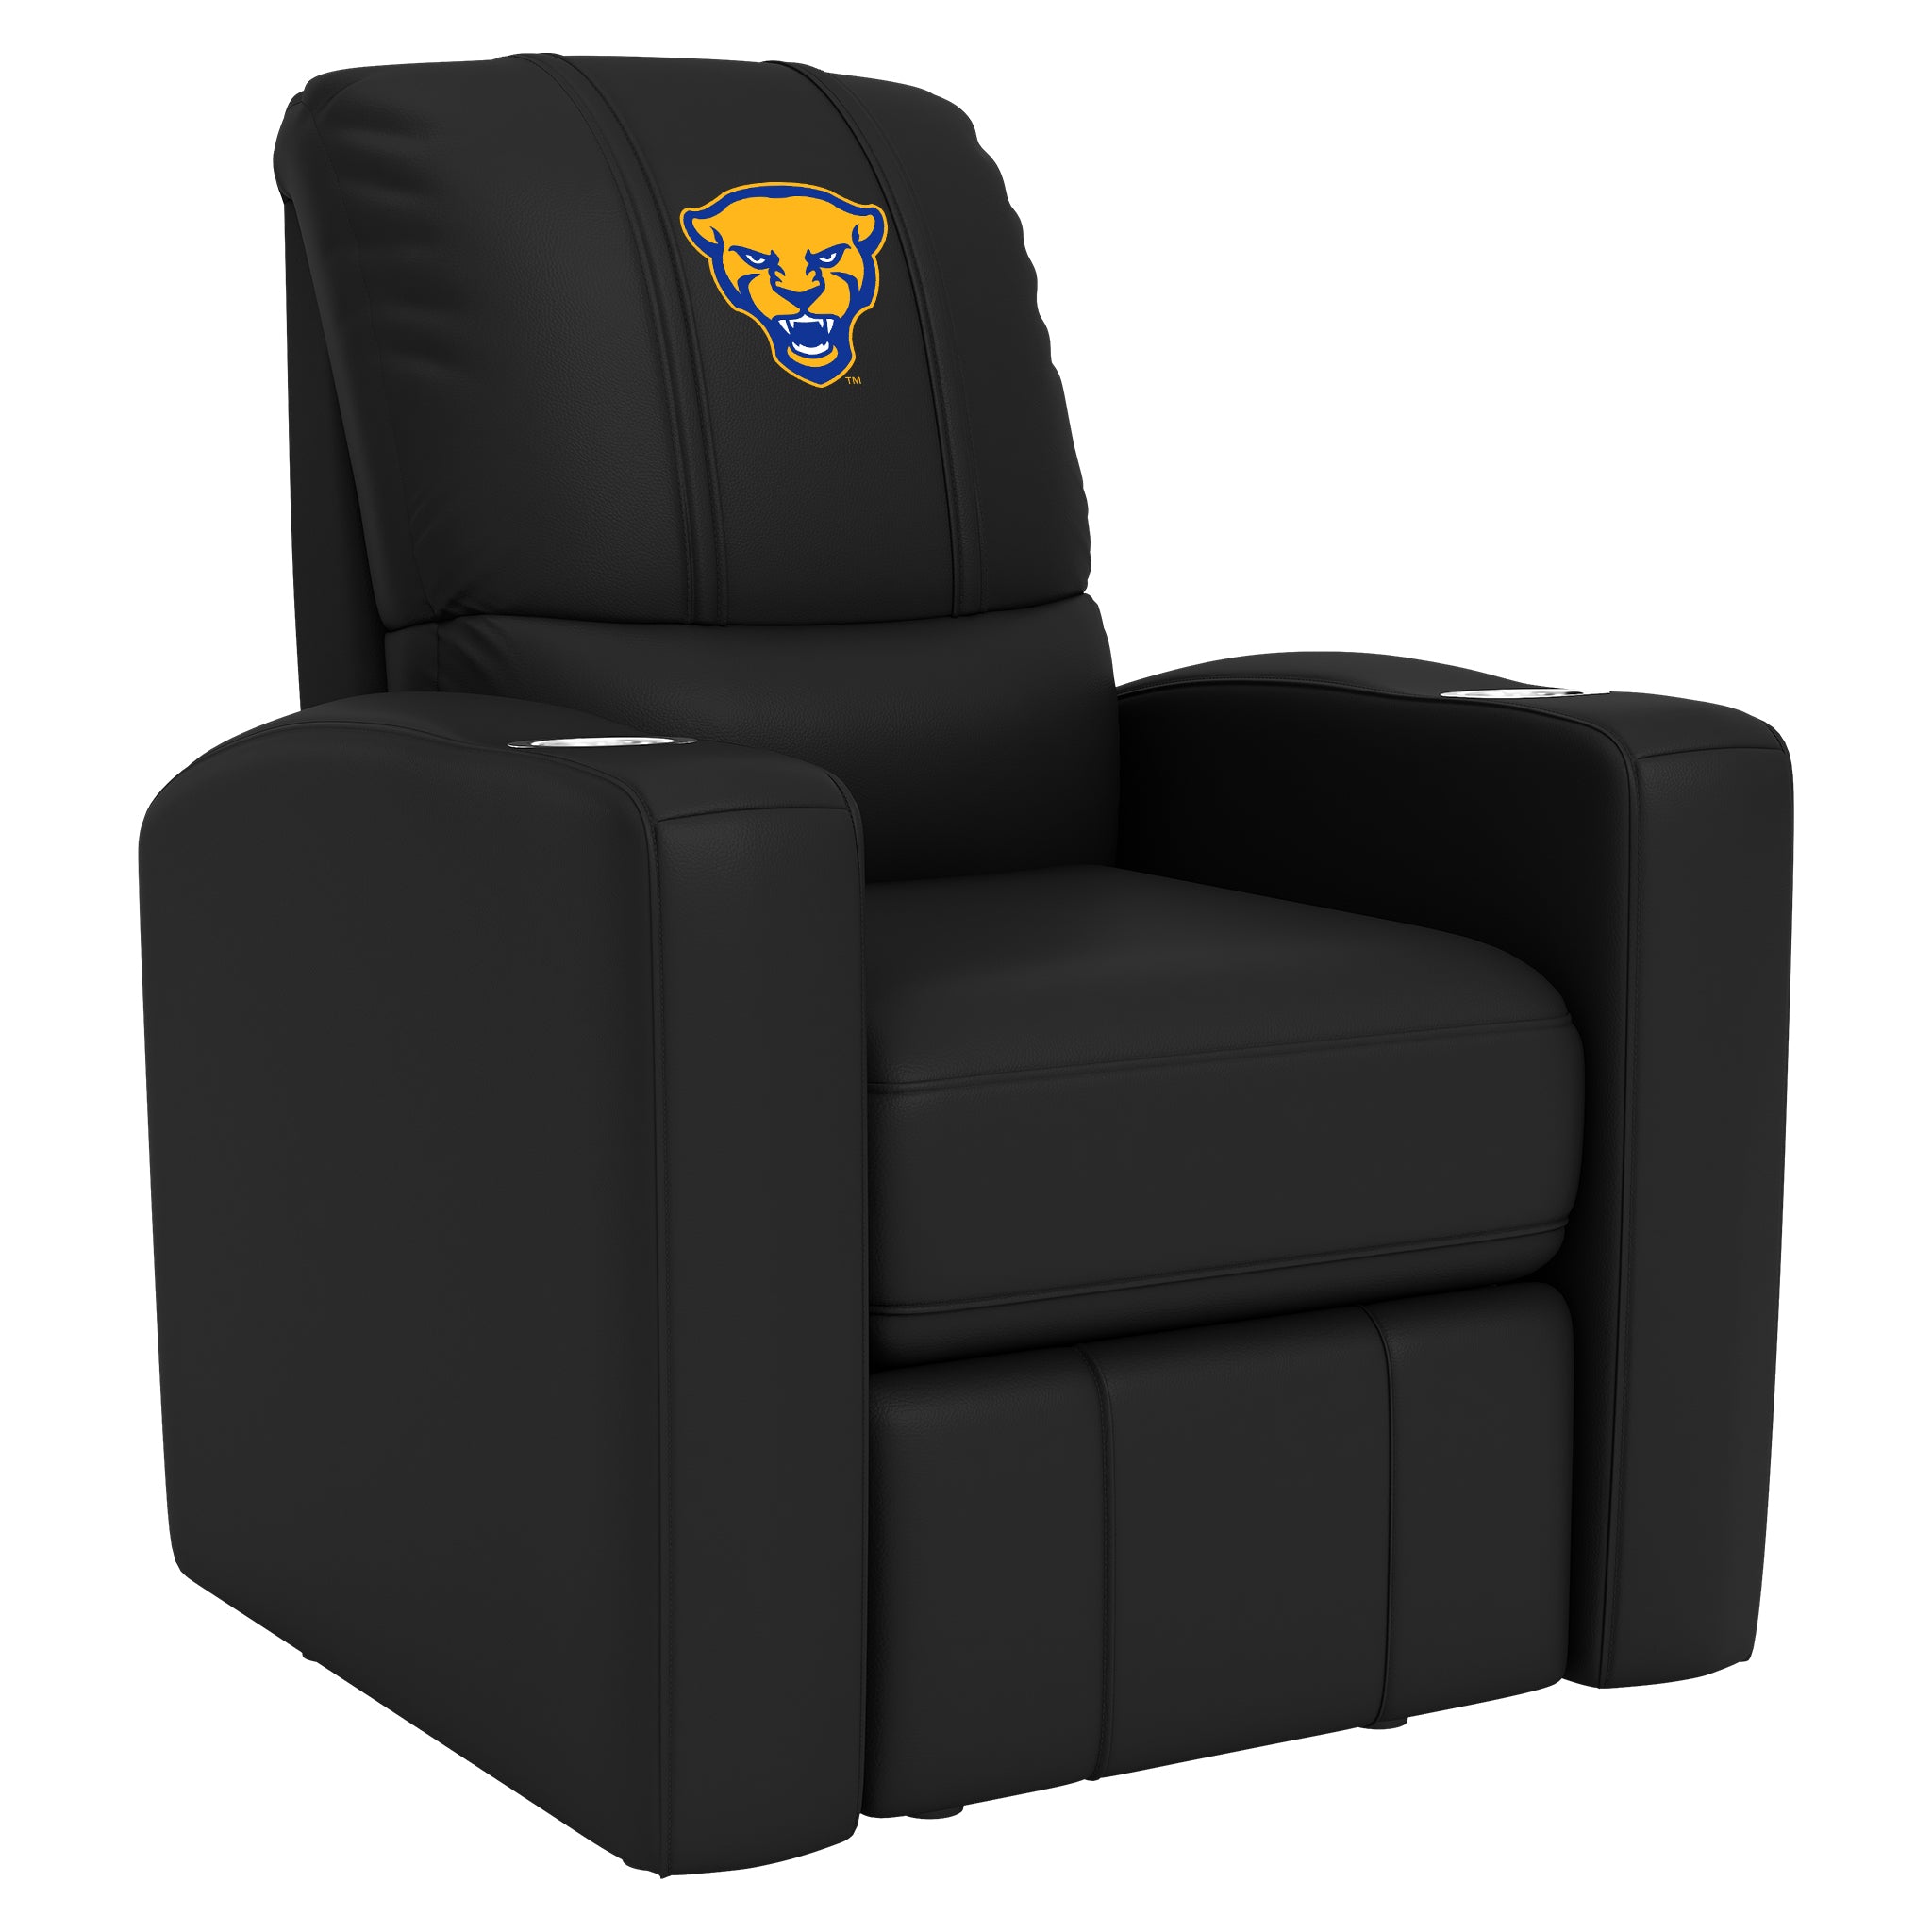 Pittsburgh Panthers Stealth Recliner with Pittsburgh Panthers Alternate Logo